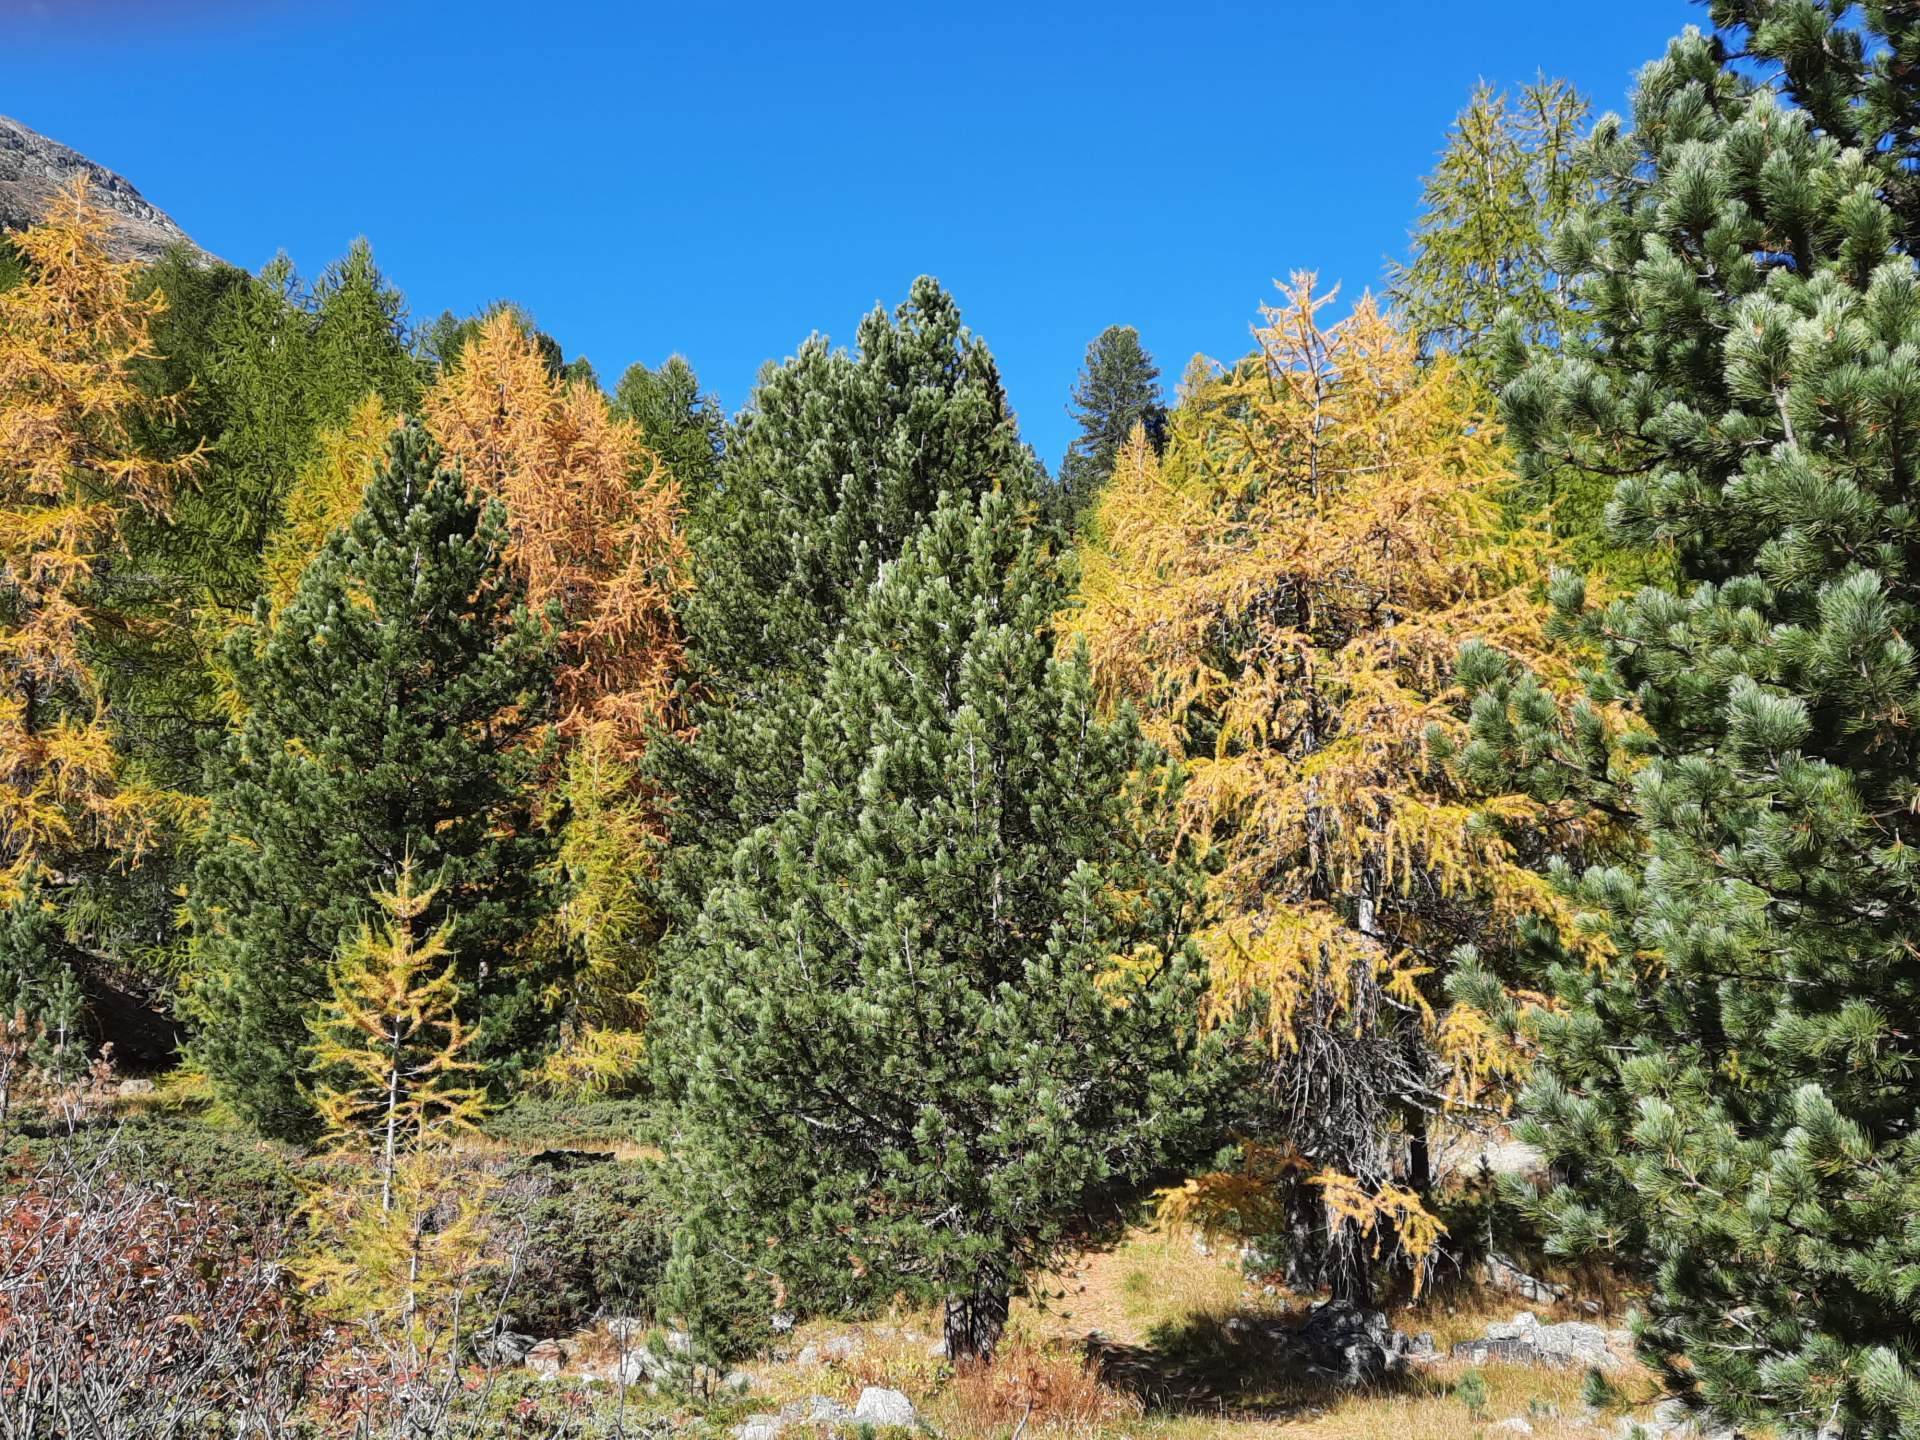 Fig. 2: Discolored larches in Indian summer in the Engadine (Morteratsch); Source: Roger Perret